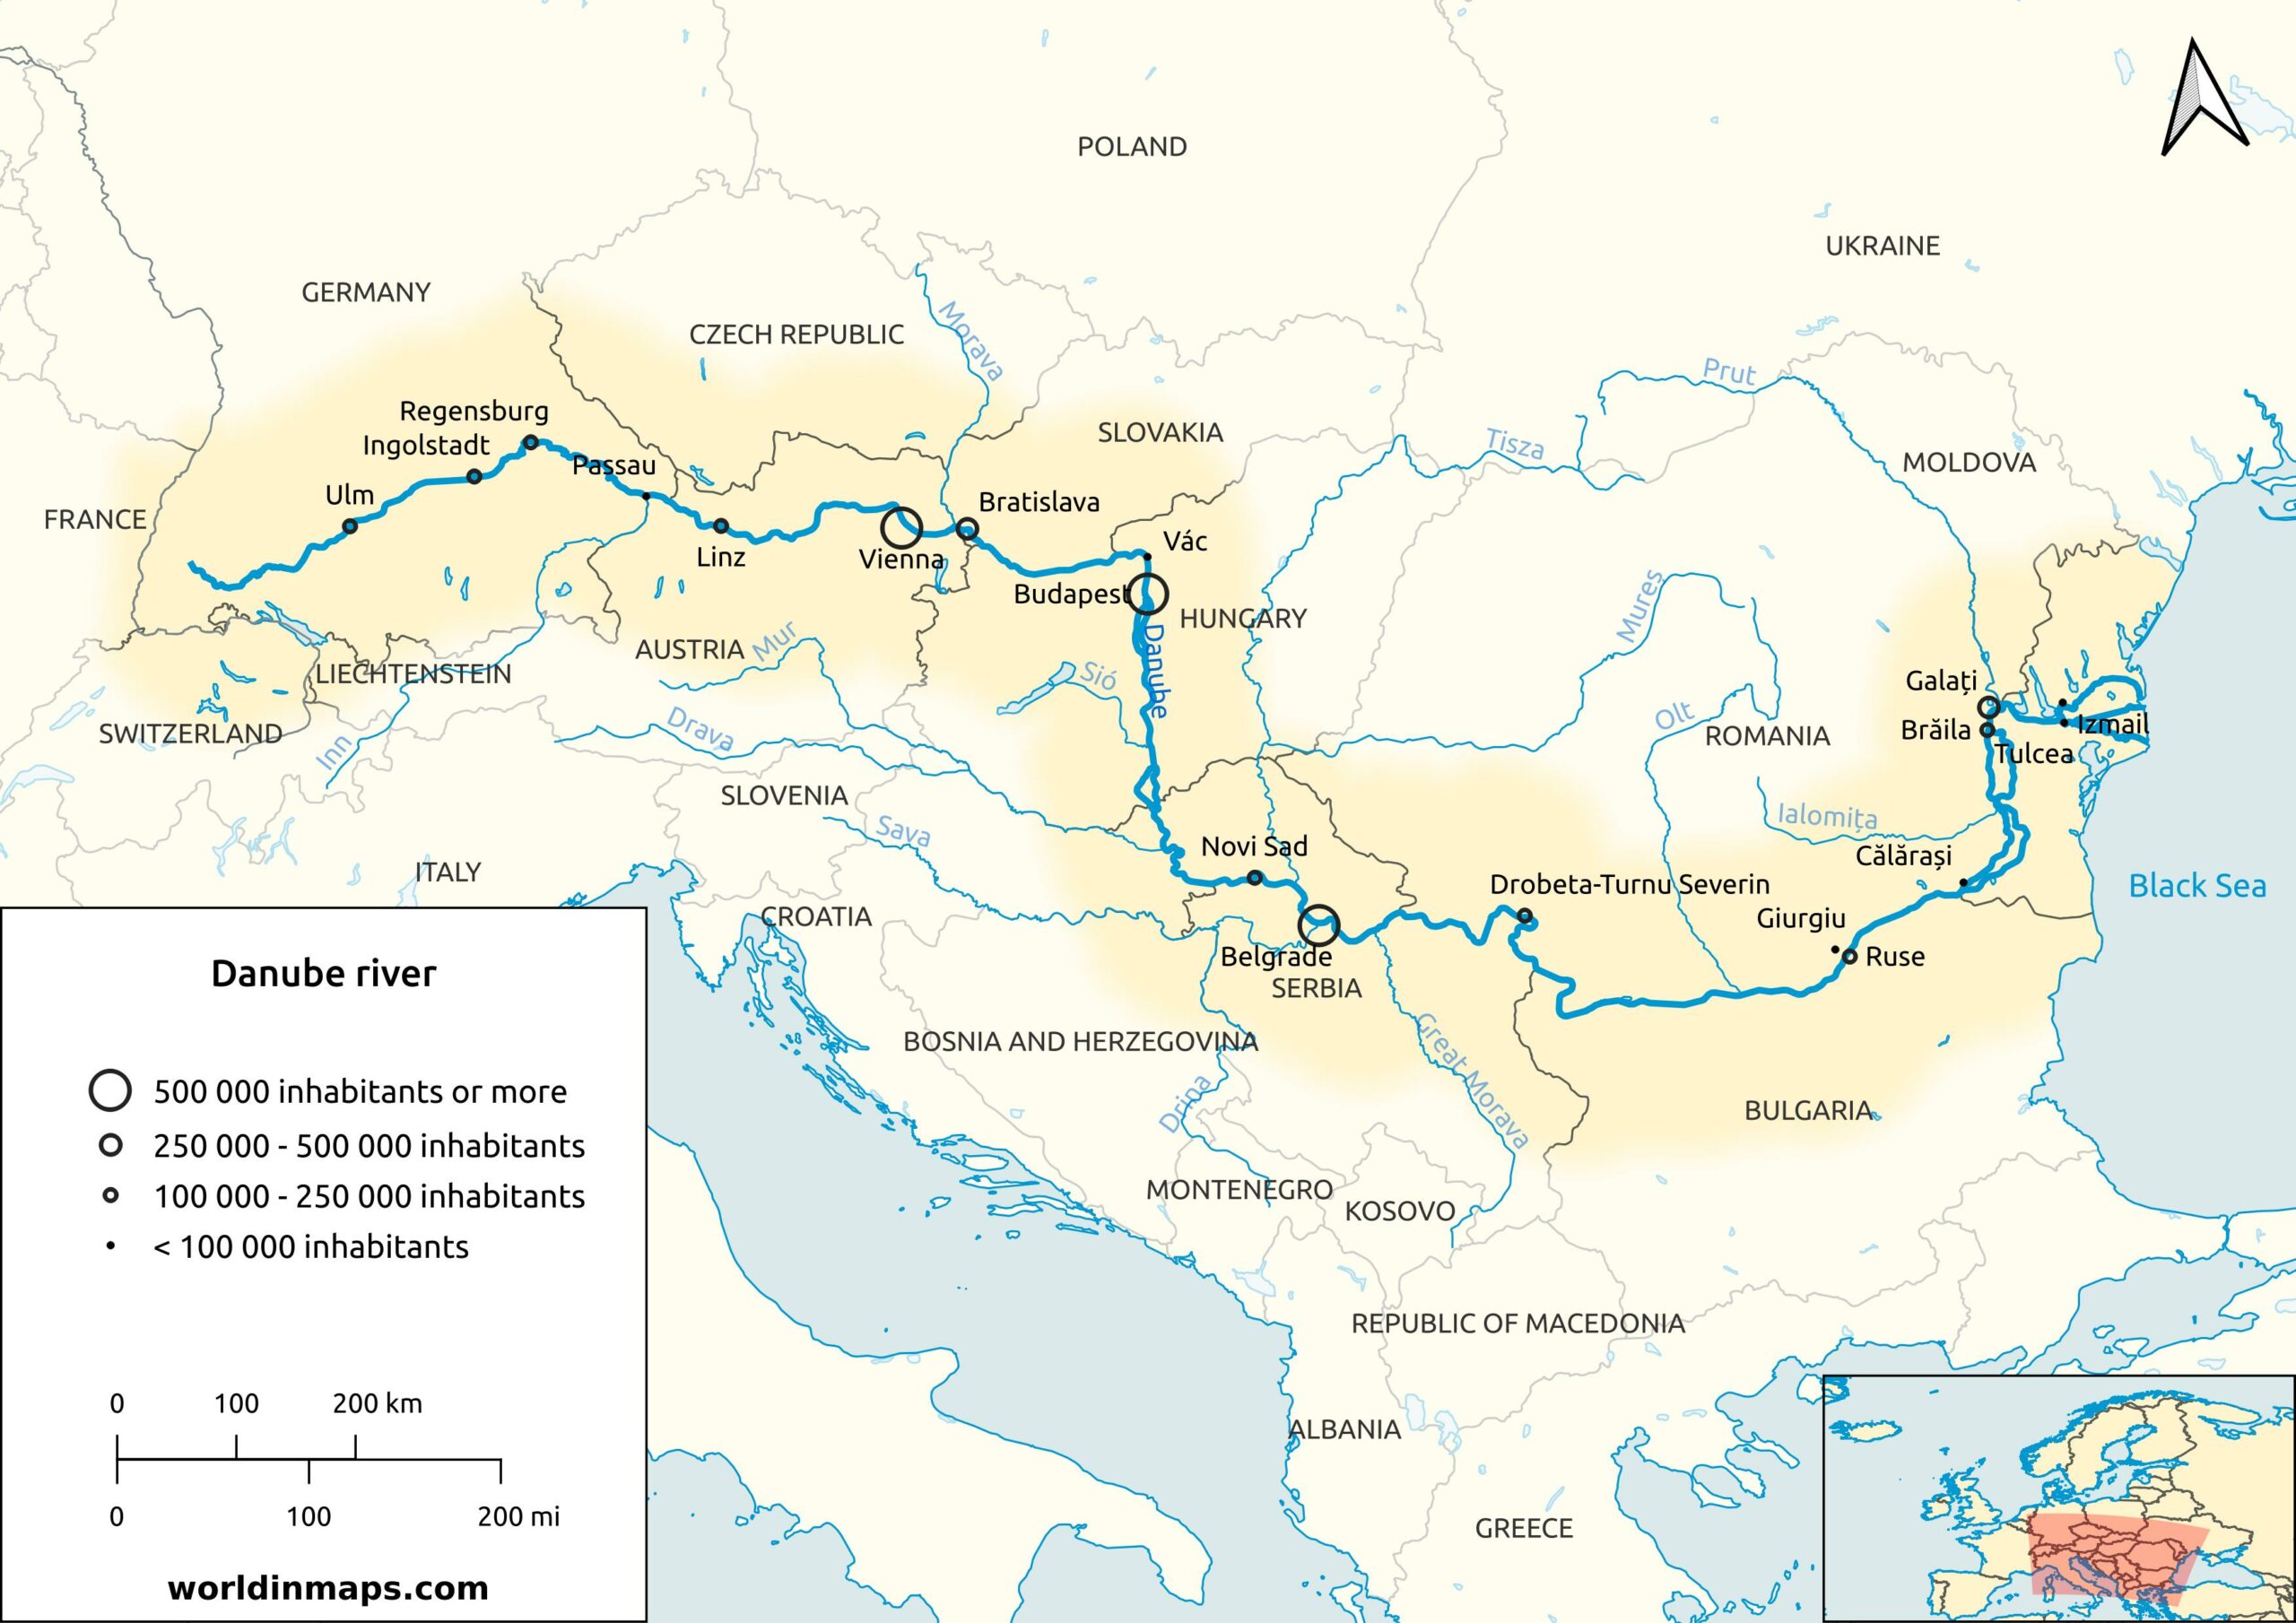 danube river map and cities